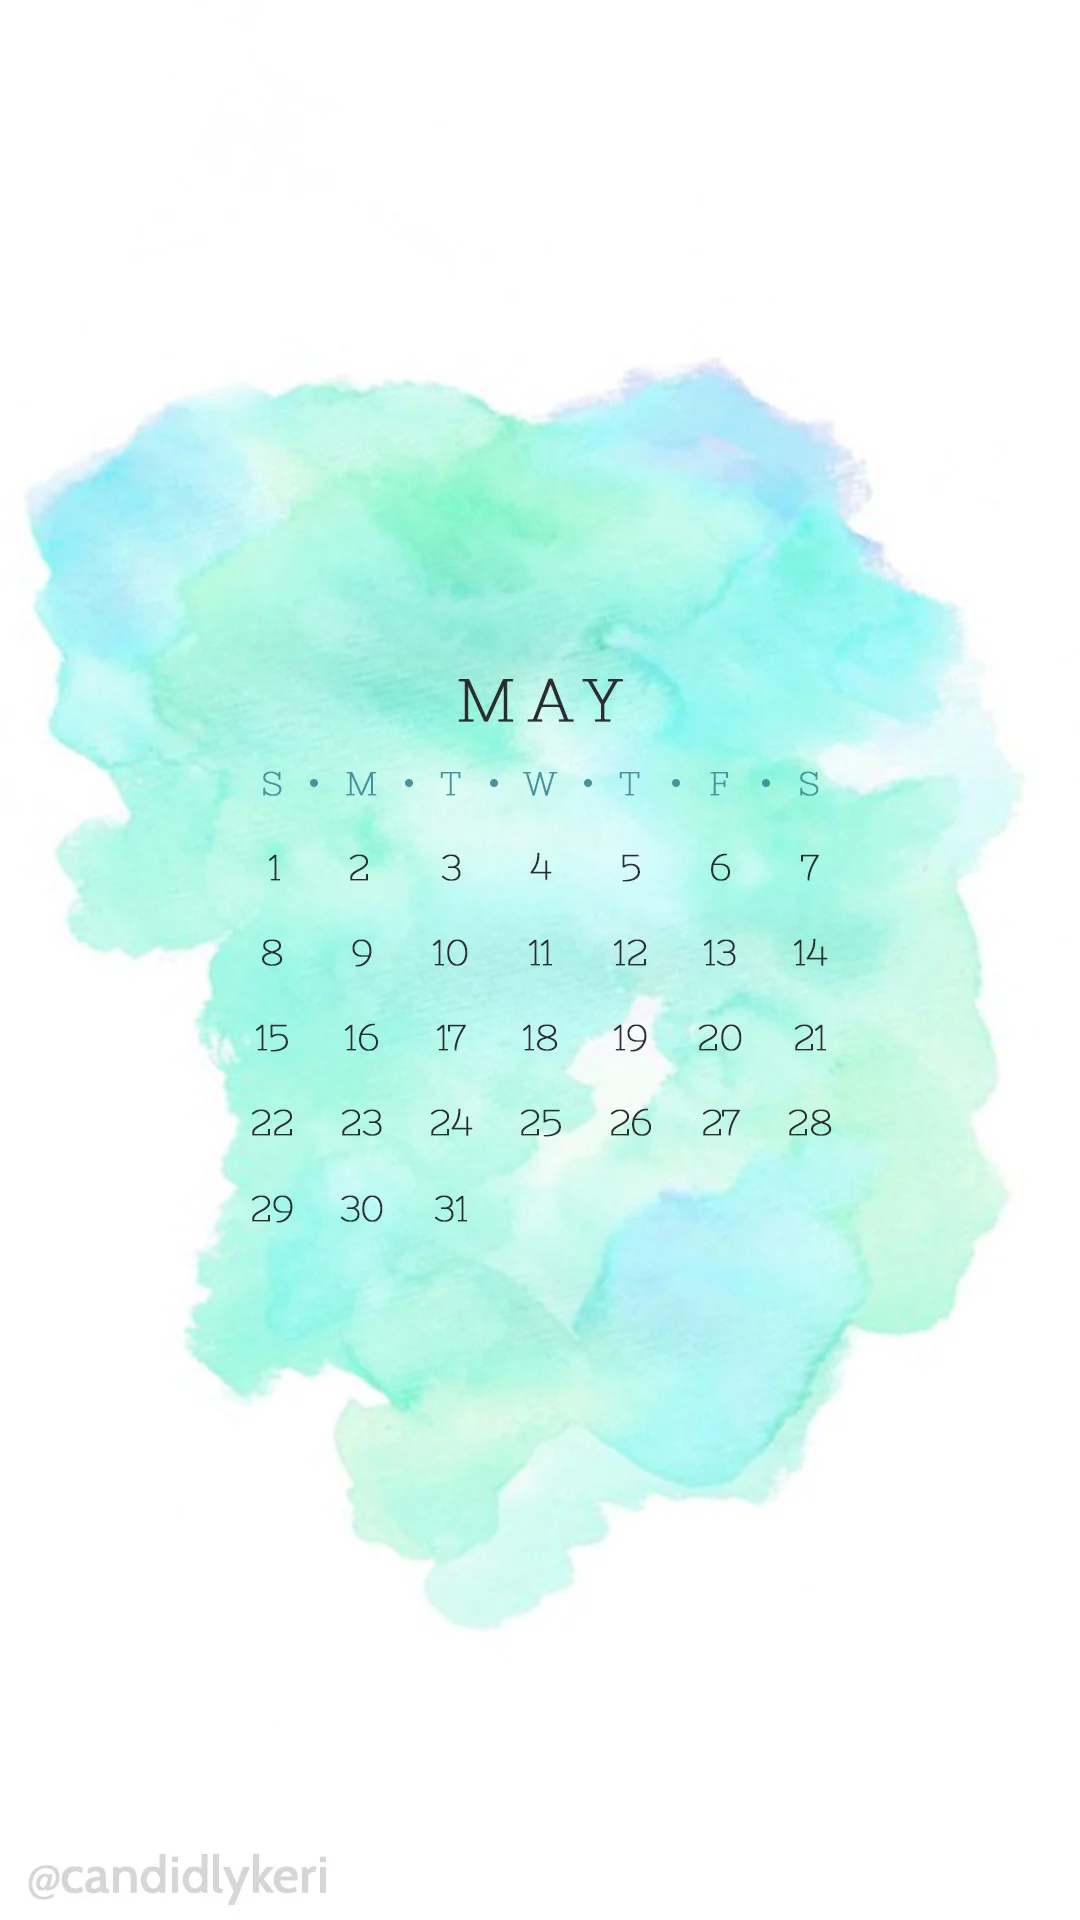 Blue turquoise and green may 2016 calendar wallpaper free download for  iPhone android or desktop background